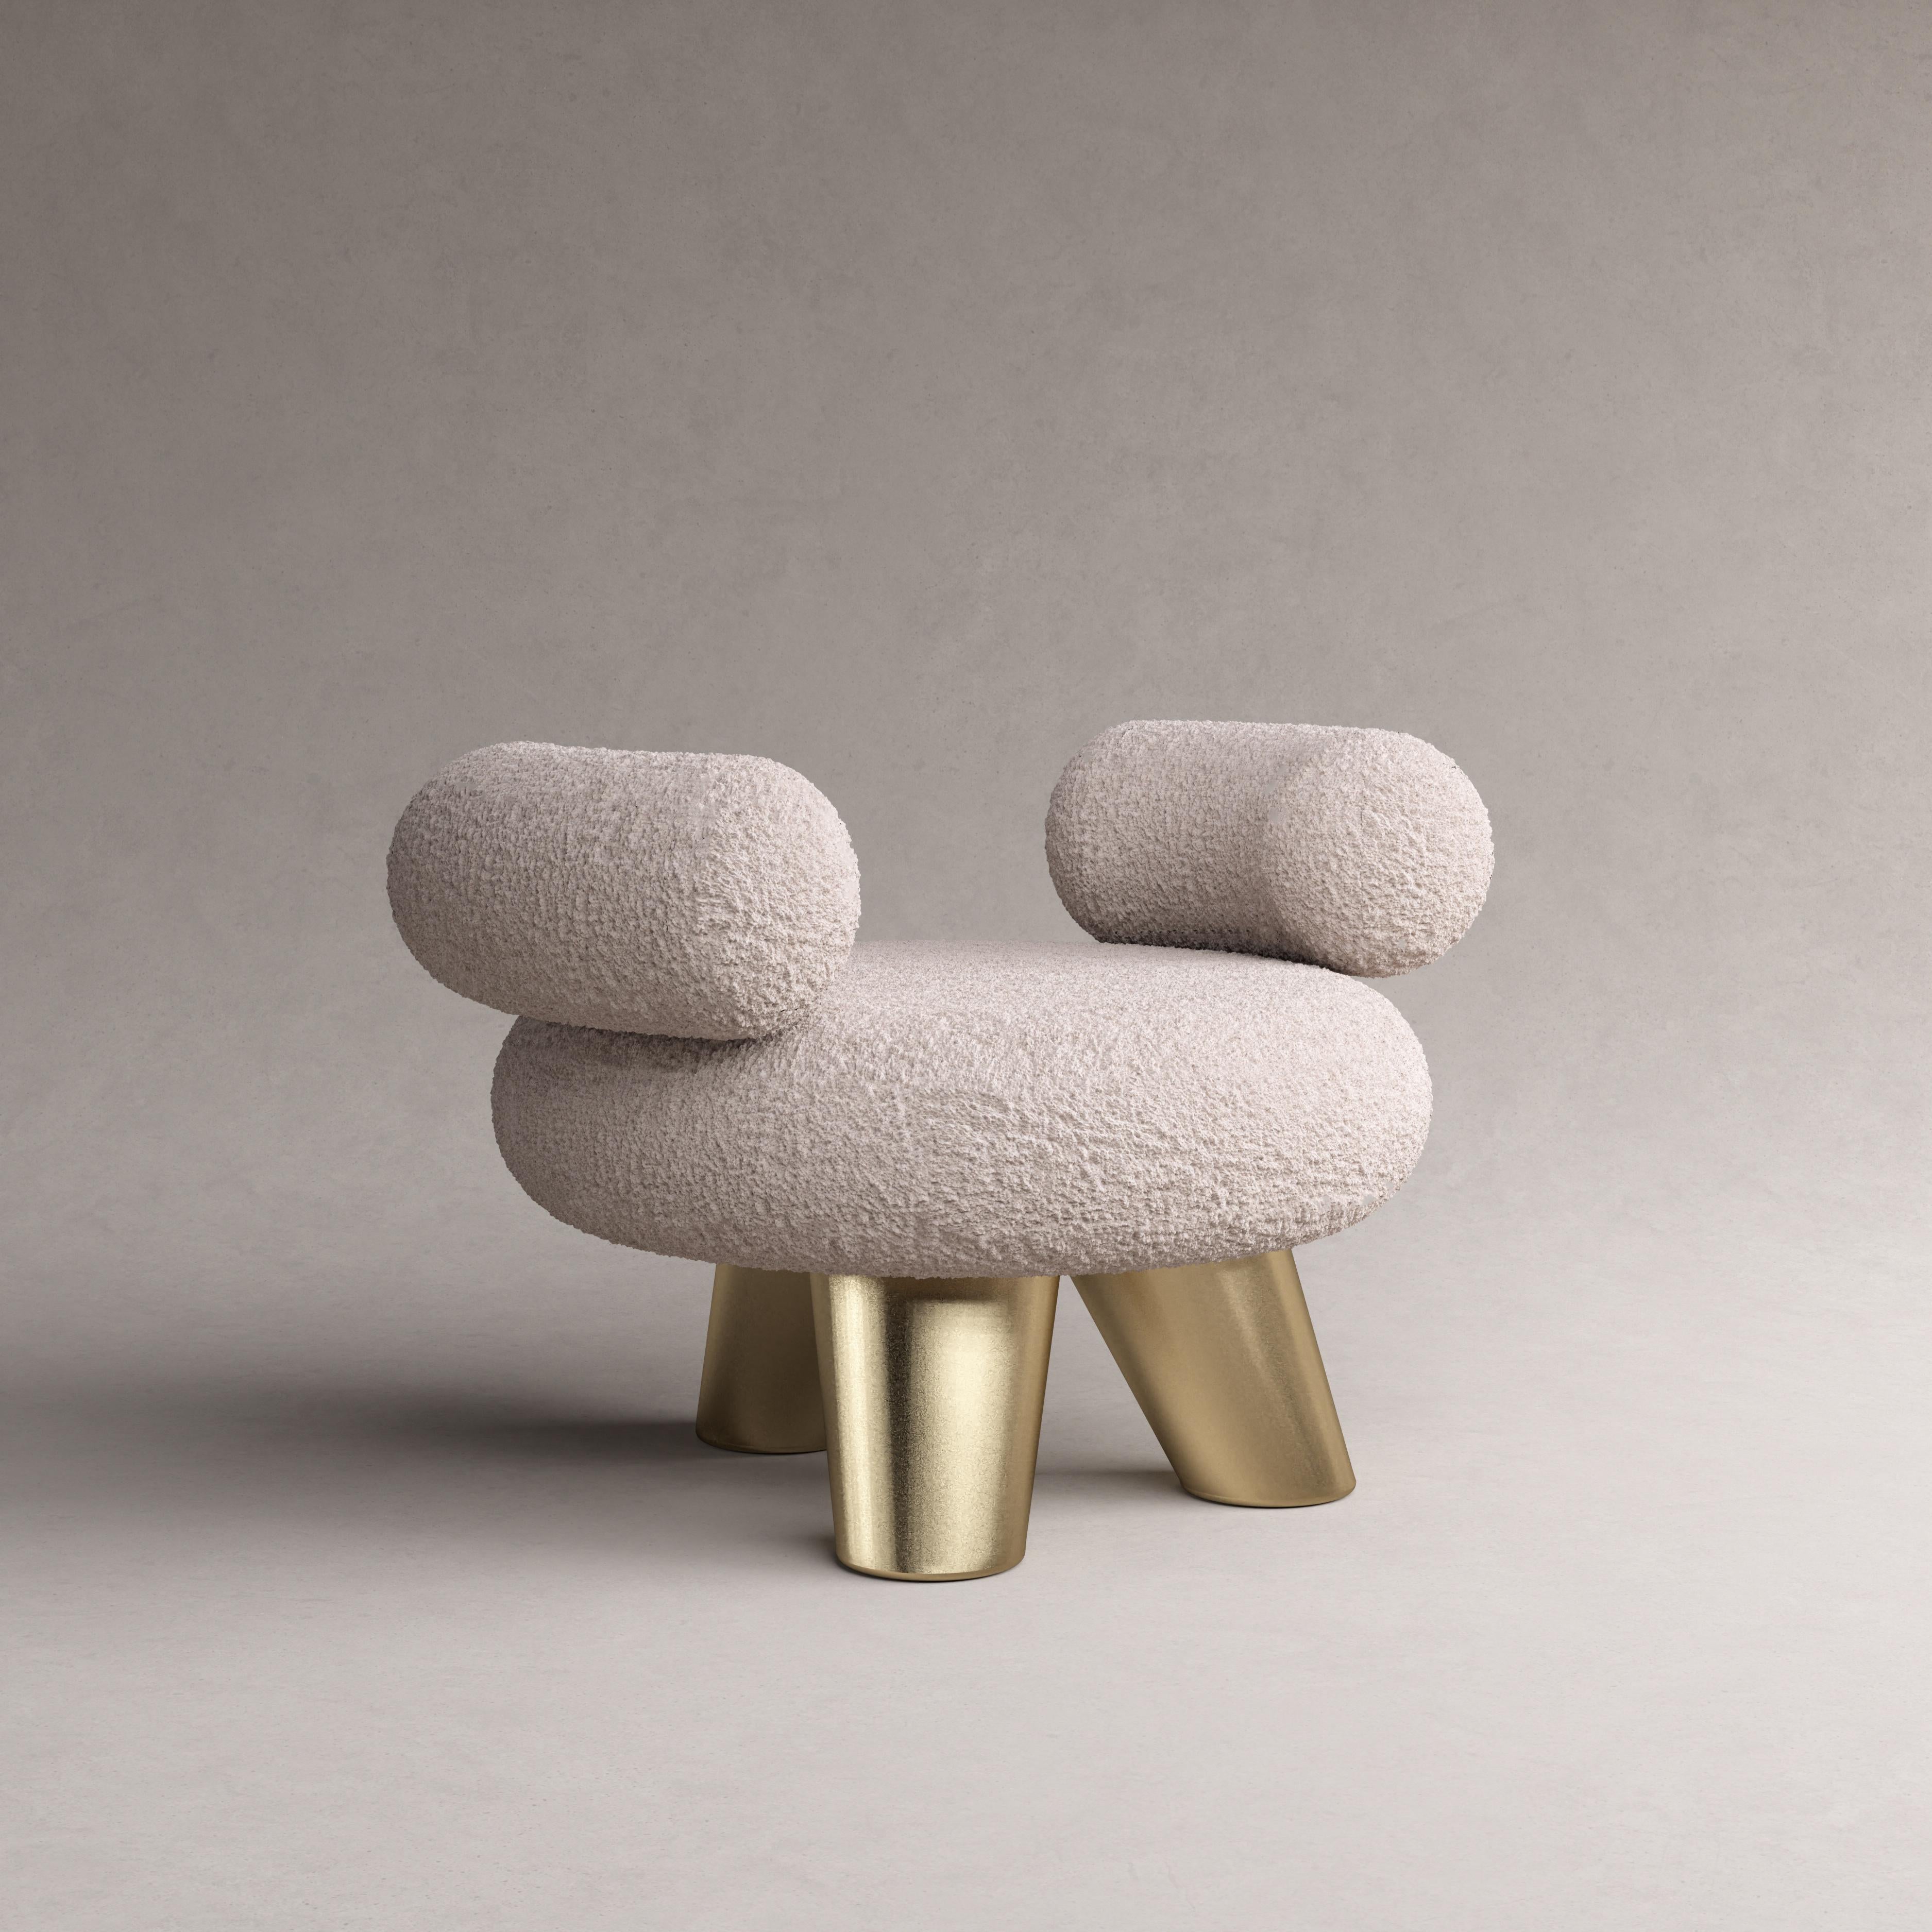 Athena ottoman by Pietro Franceschini
Manufacturer: Stefano Minotti
Dimensions: W 79 x H 43-63 cm
Materials: Lamb and gold leaf
Available materials: Lamb, gold leaf, or cast brass

Pietro Franceschini is an architect and designer based in New